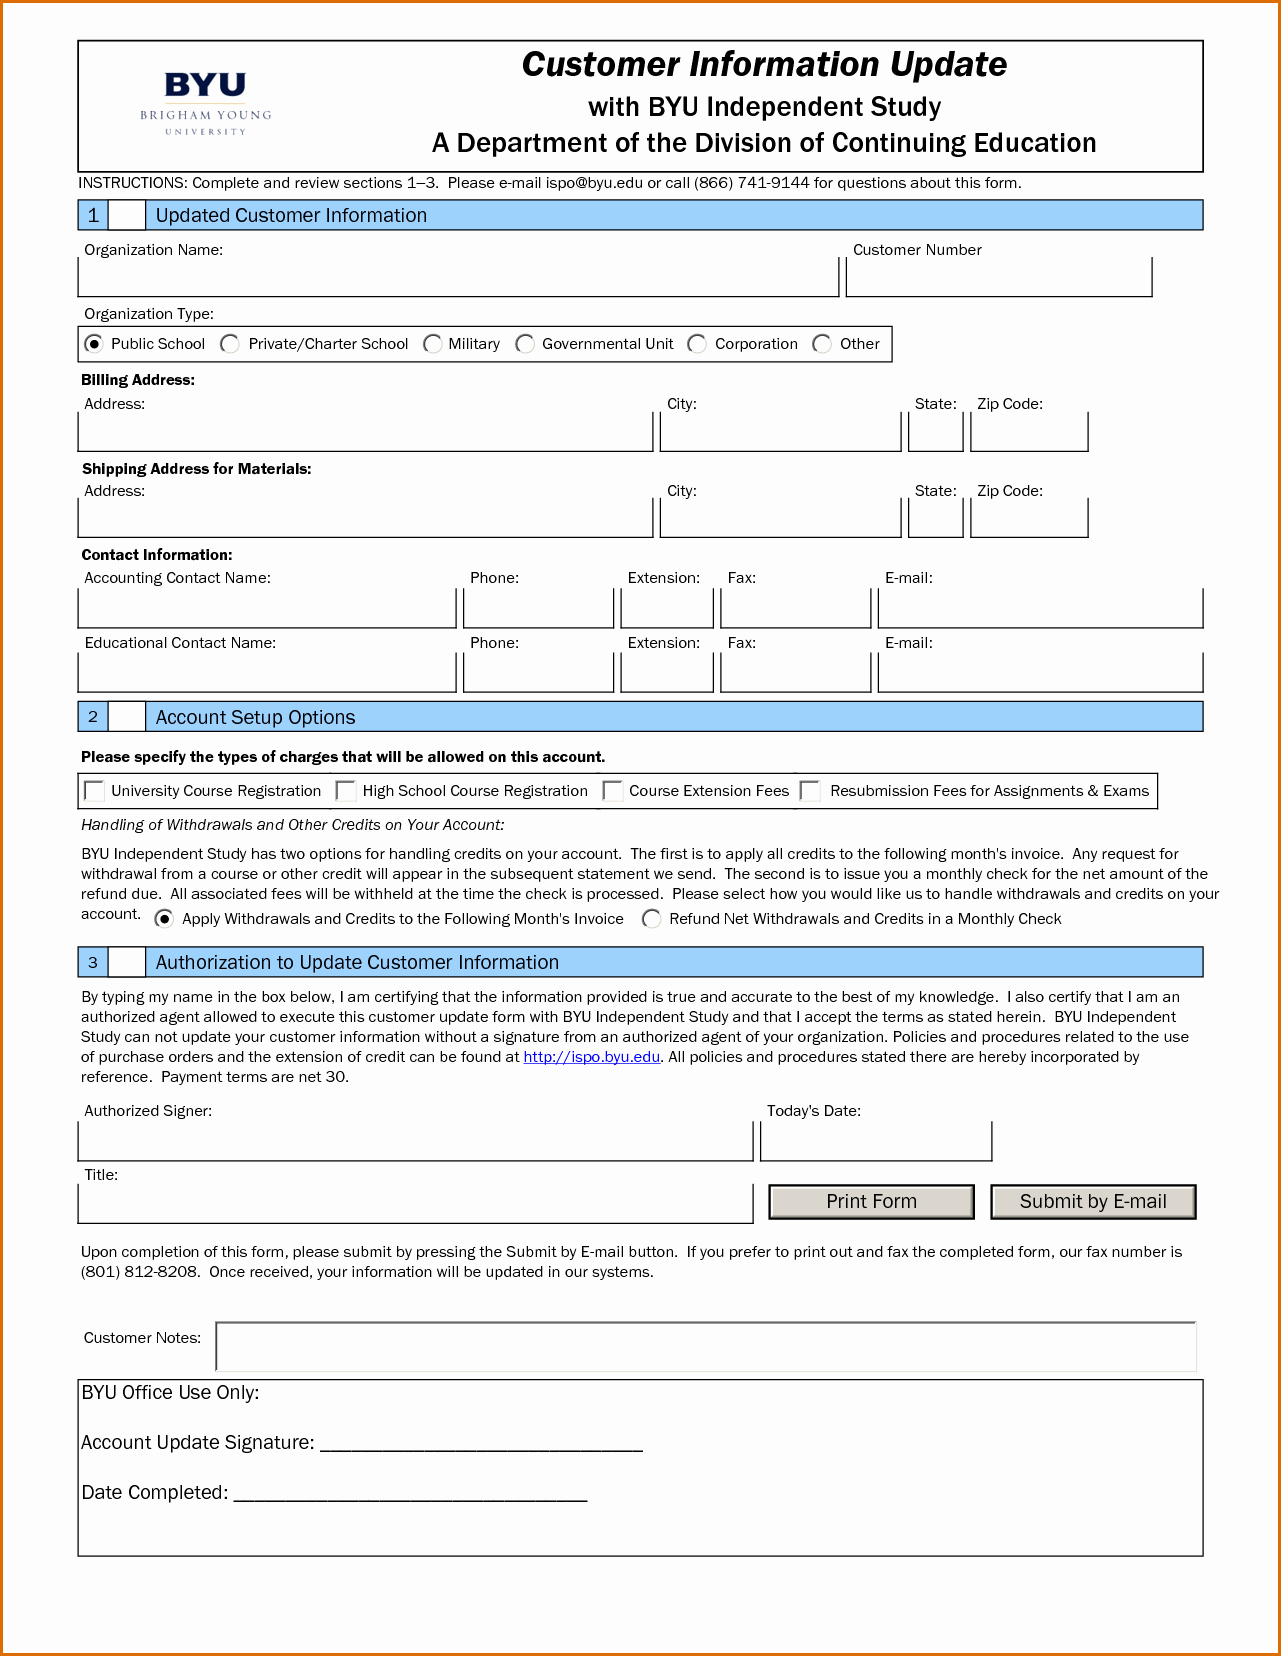 Customer Contact Information form Template Lovely 13 Customer Information form Template